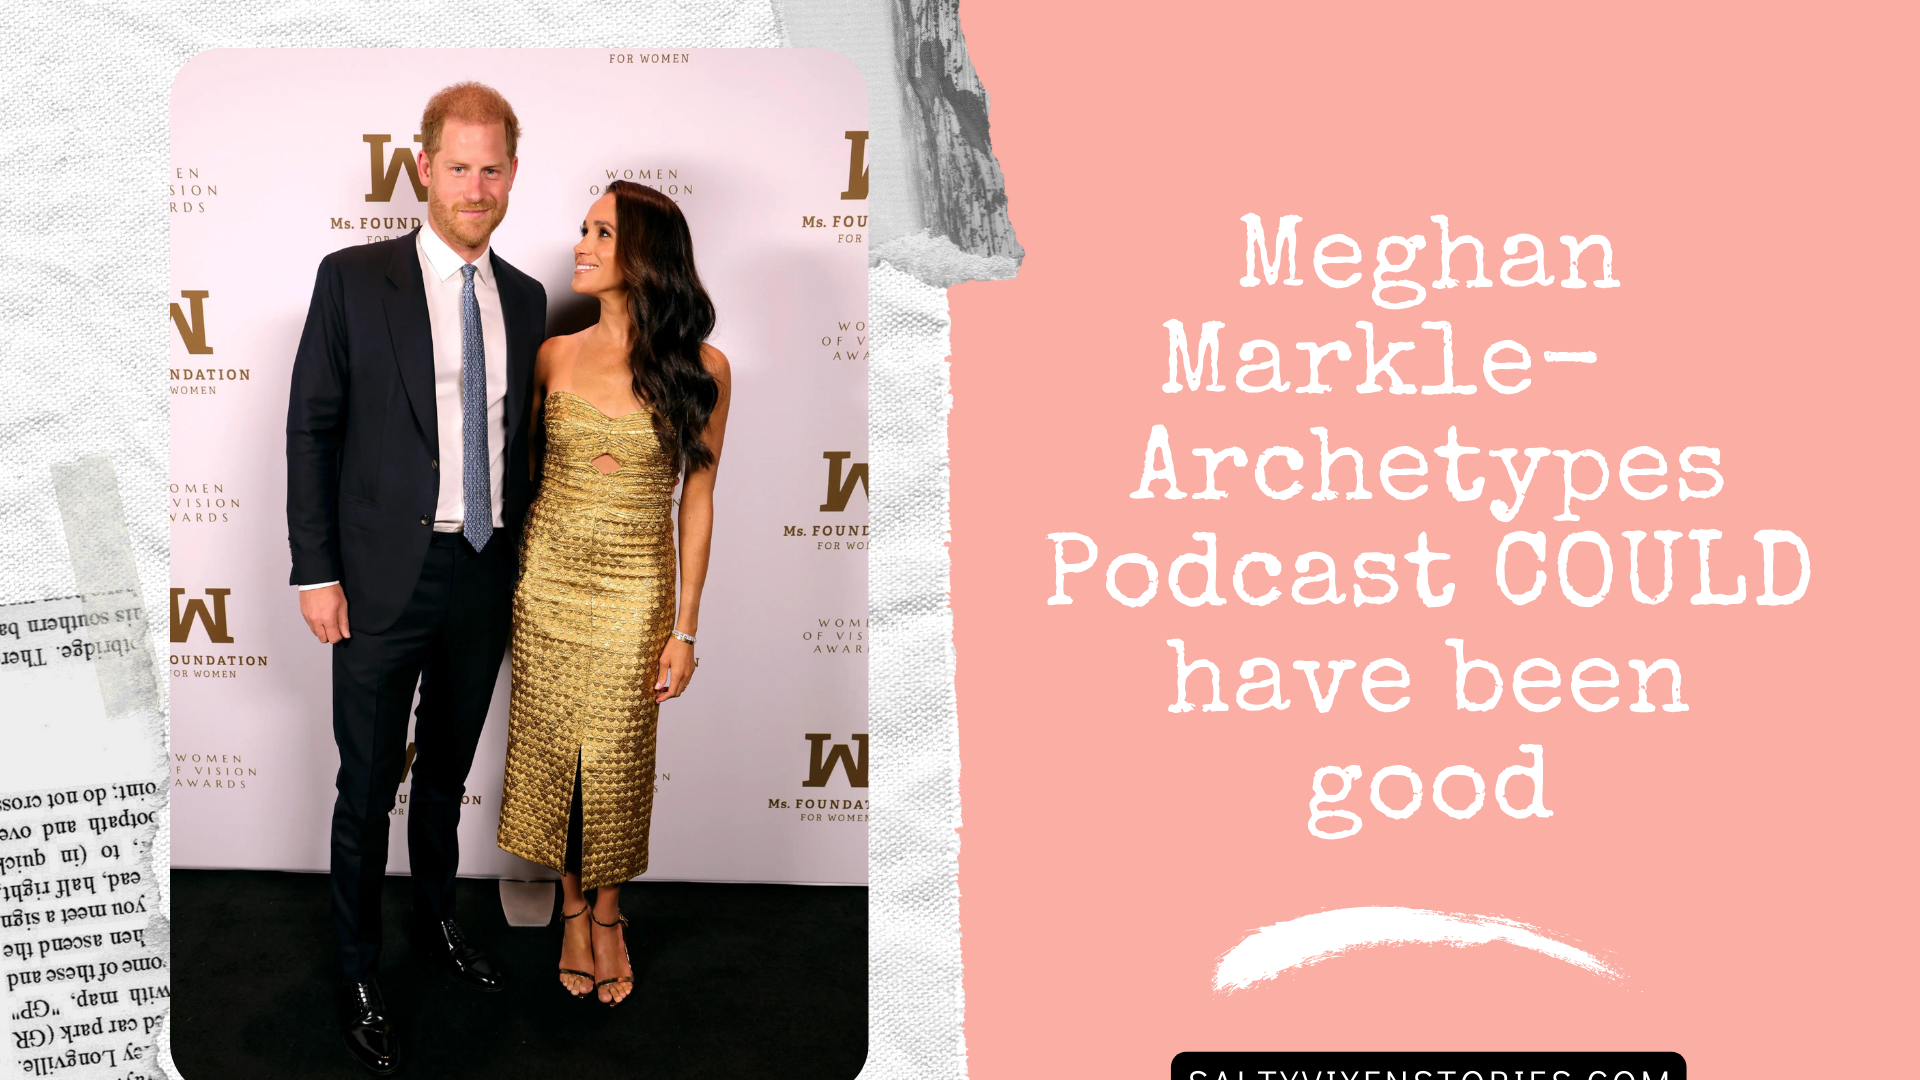 Meghan Markle-Archetypes Podcast COULD have been good